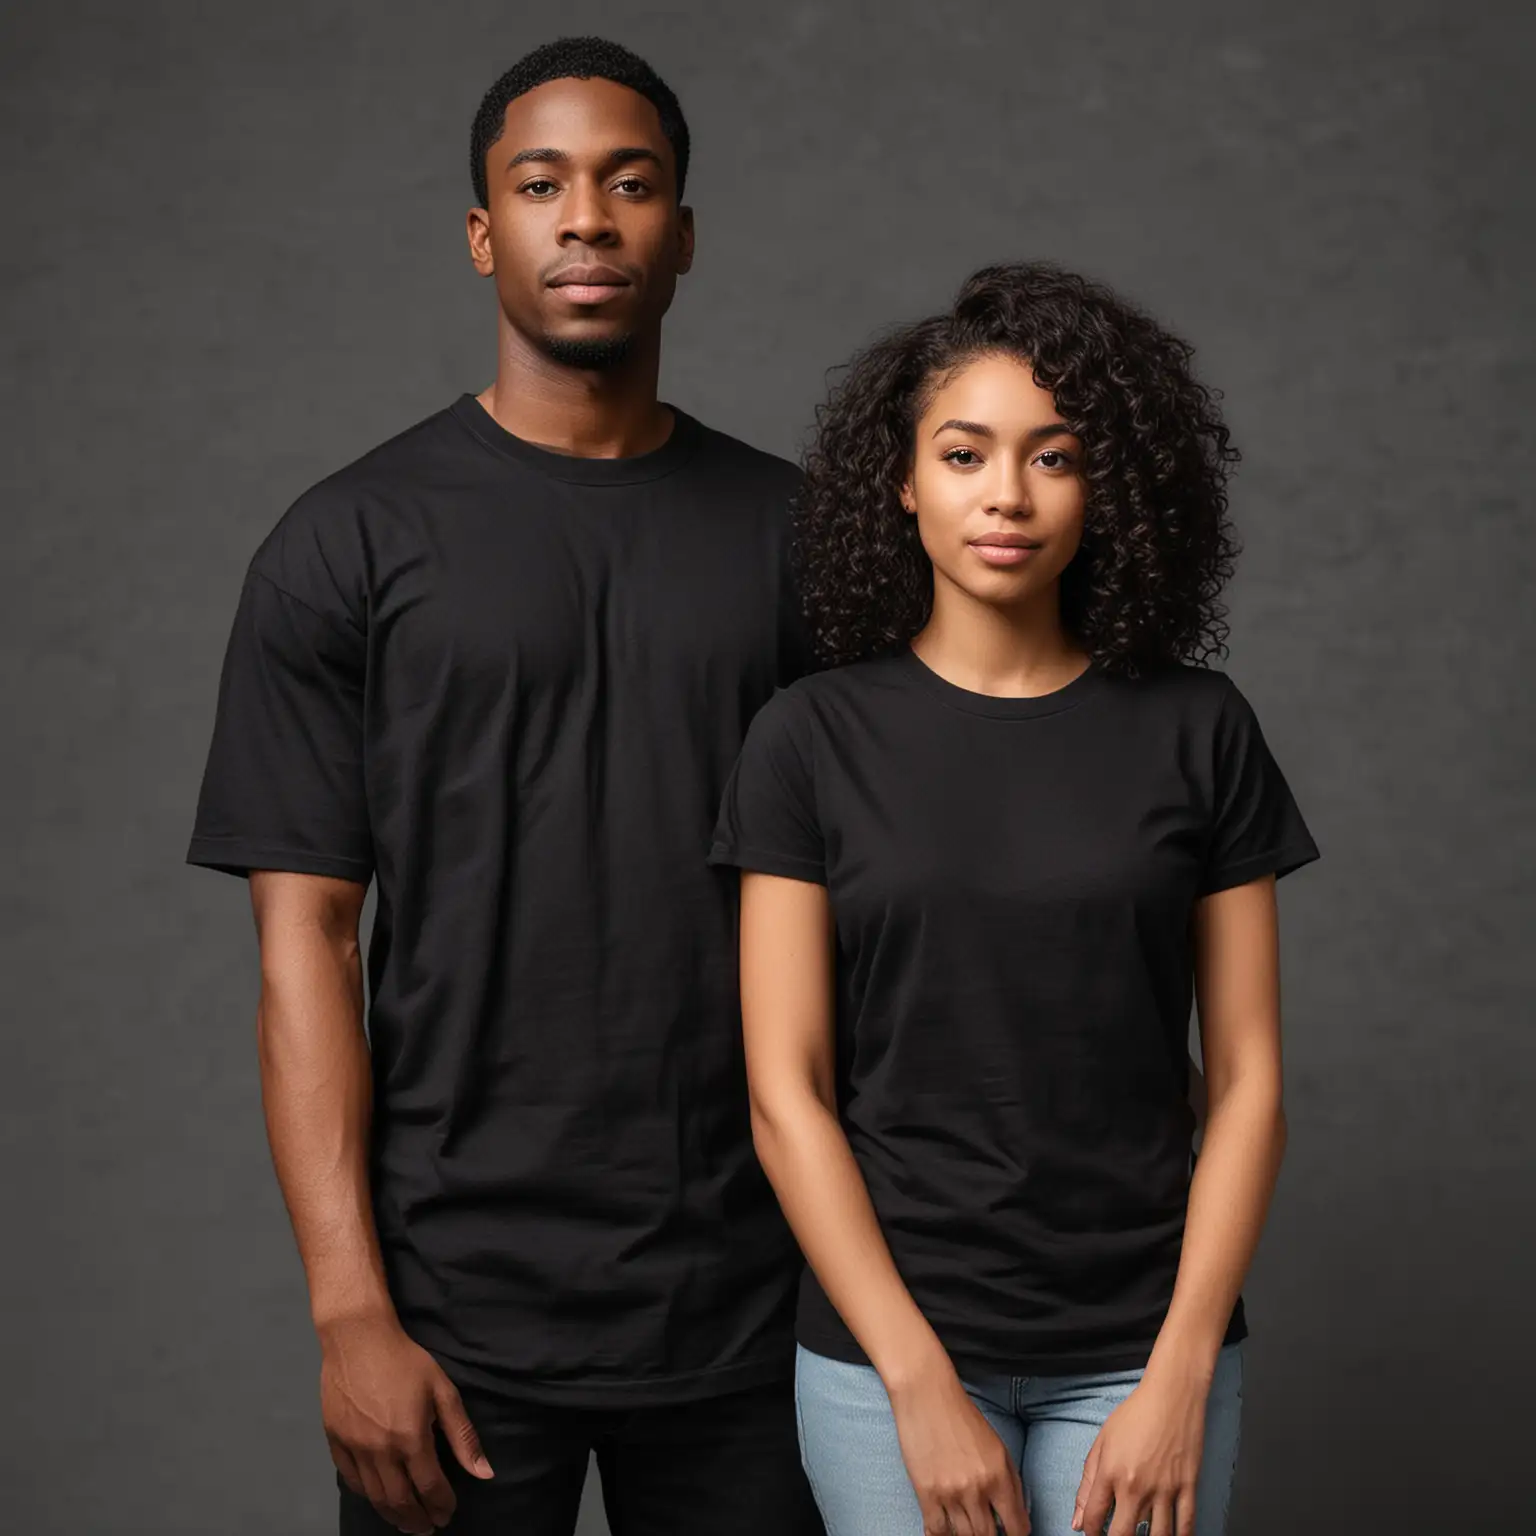 Black Man and Woman Standing Together in Matching Black TShirts